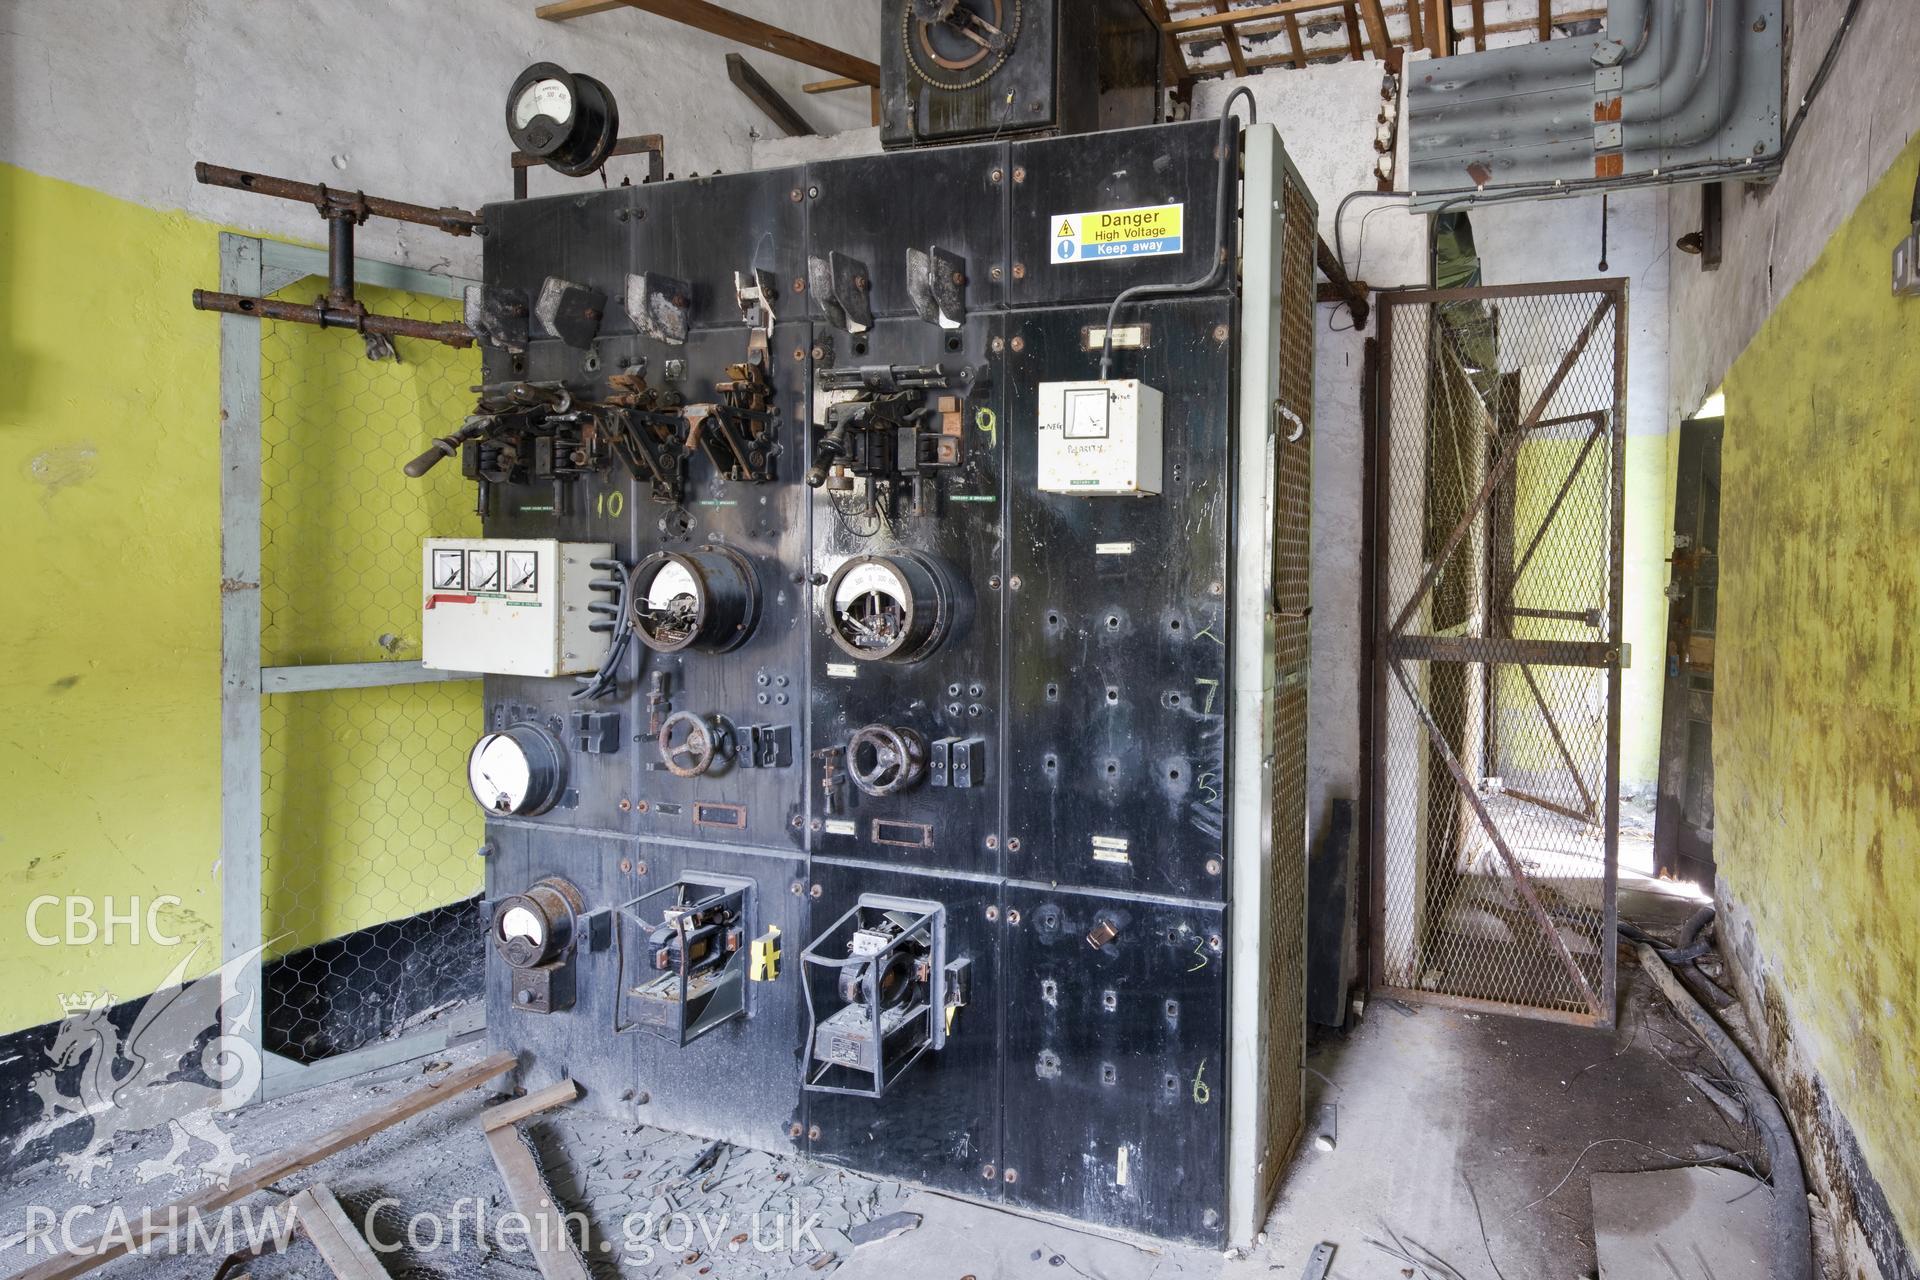 Electricity substation, interior.